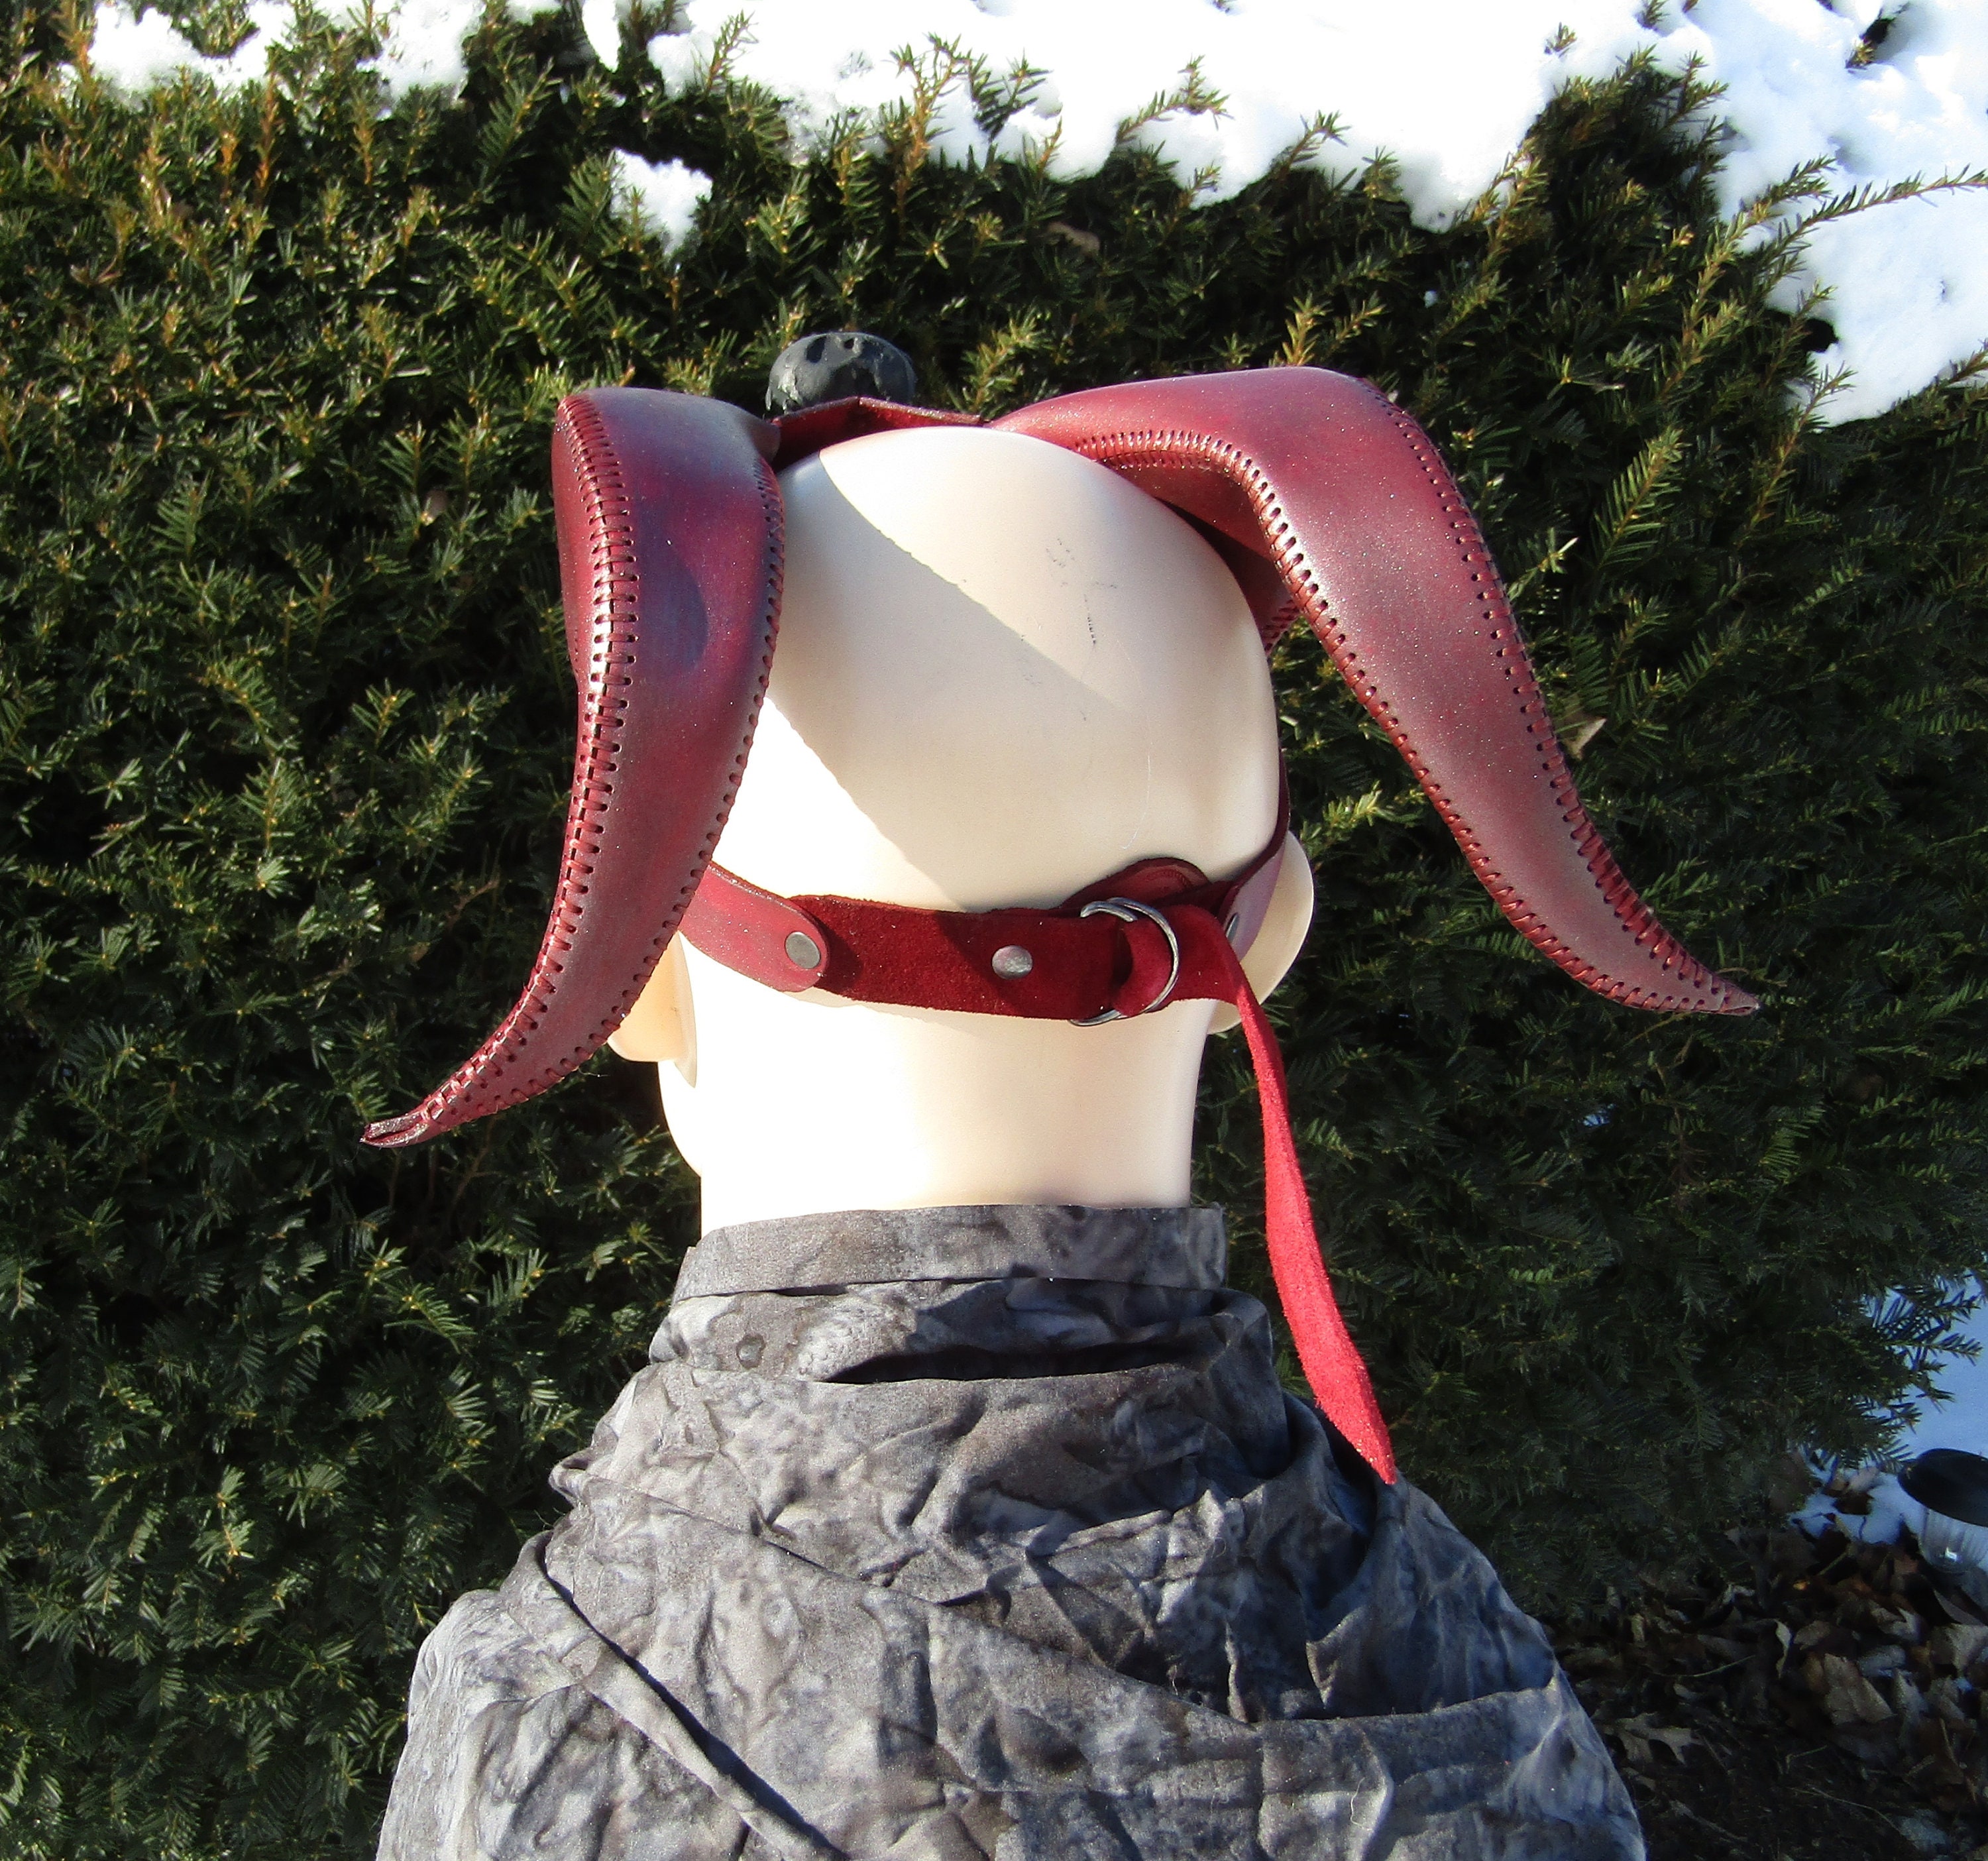 Leather Ram Style Horn Headband Great for any attire any occasion LARP Cosplay Renaissance Post Apocalyptic Burning Man